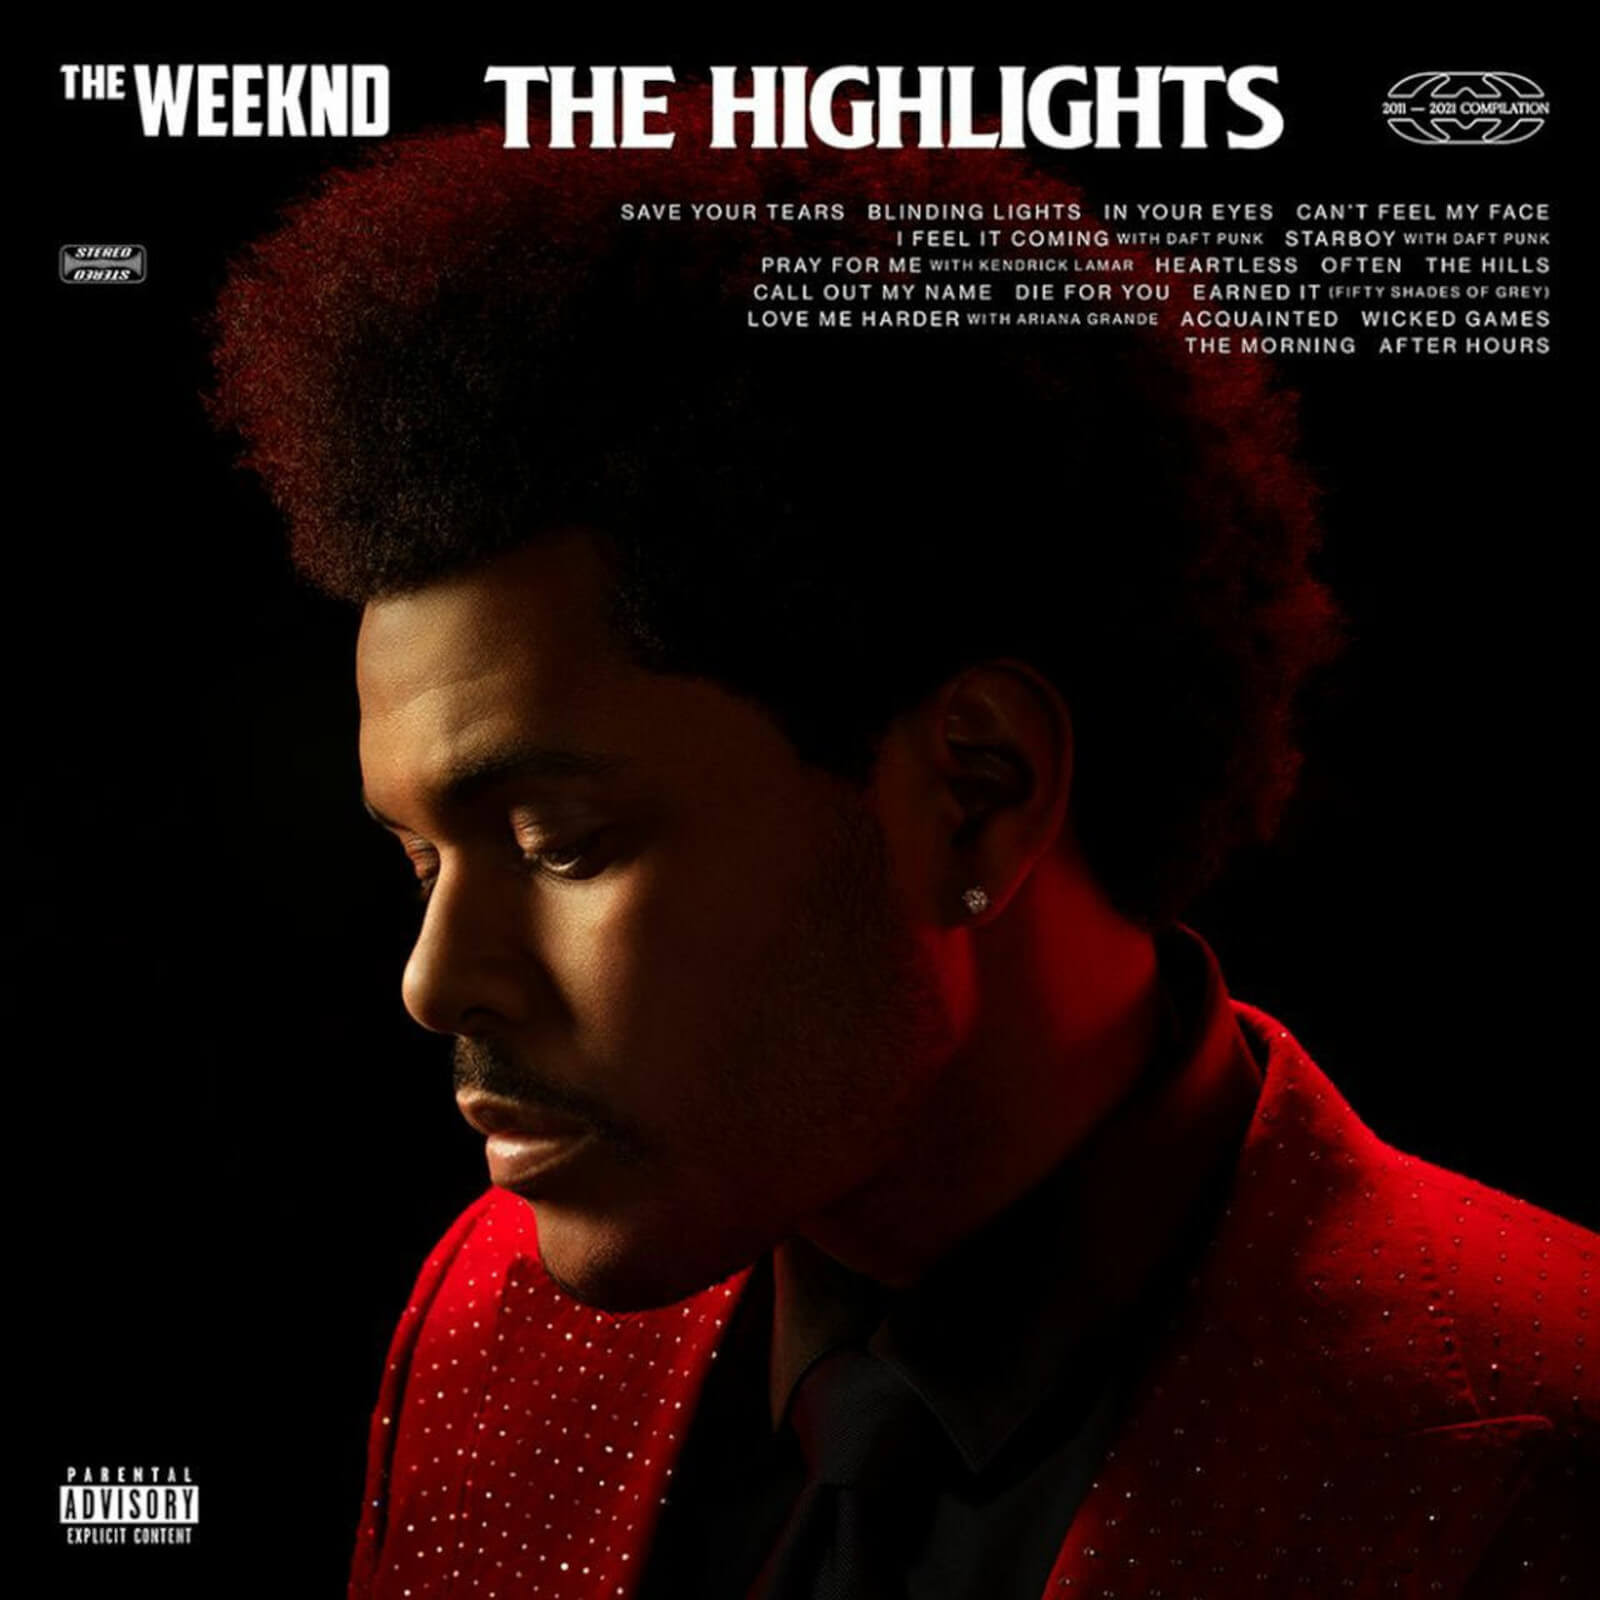 The Weeknd - The Highlights Vinyl